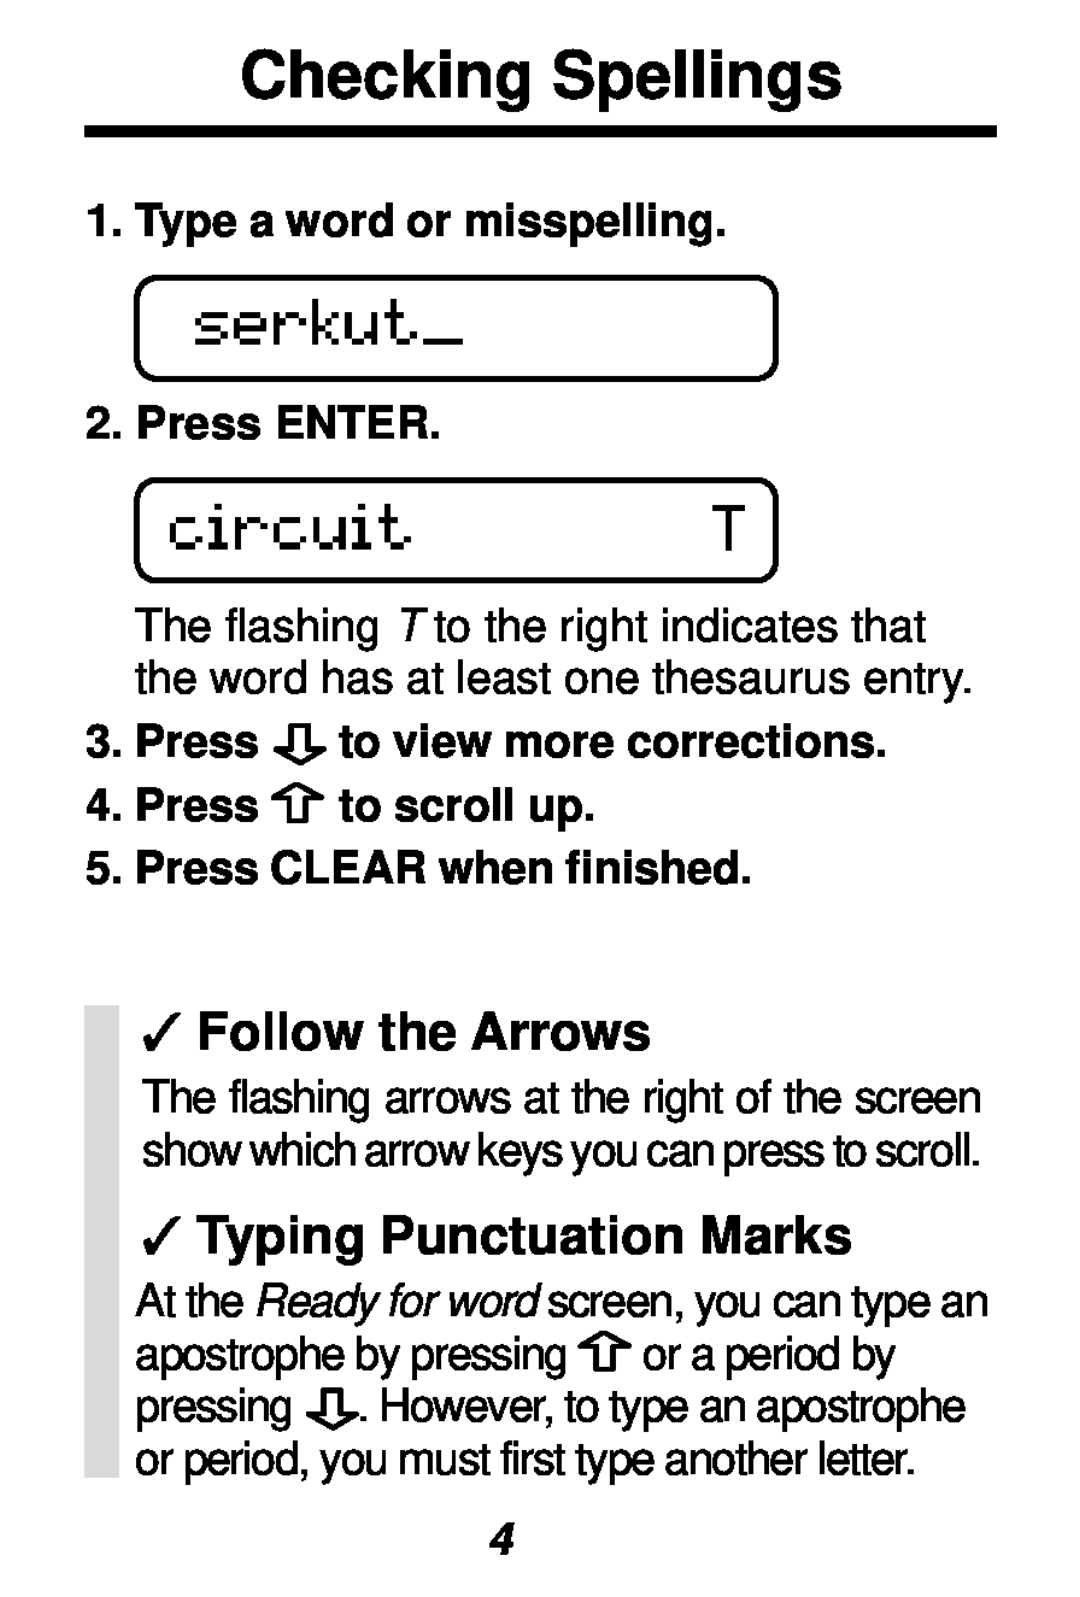 Franklin SA-98 Checking Spellings, Follow the Arrows, Typing Punctuation Marks, Type a word or misspelling 2.Press ENTER 